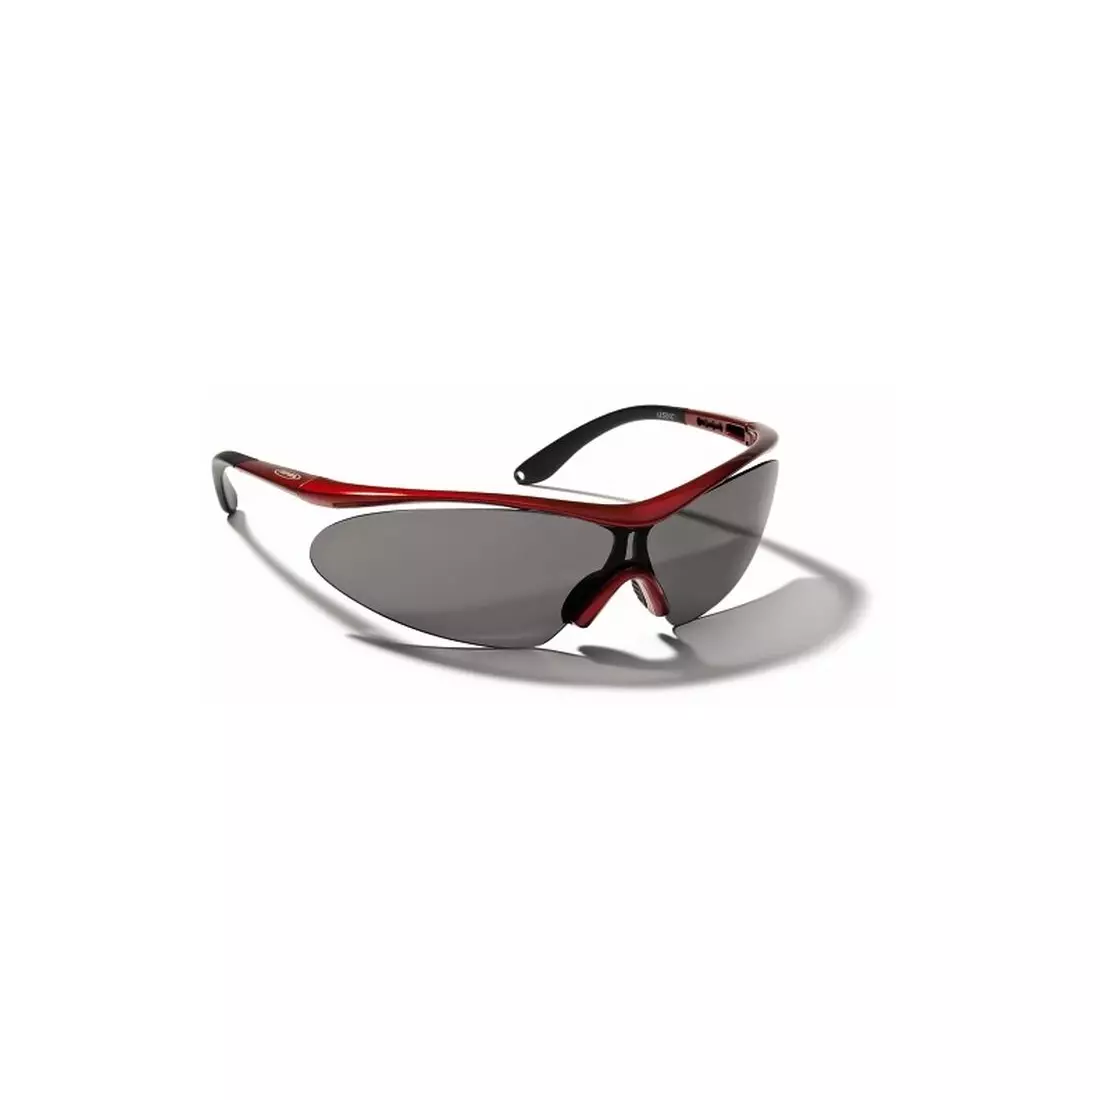 ALPINA ARSENIC sports glasses - color: Red